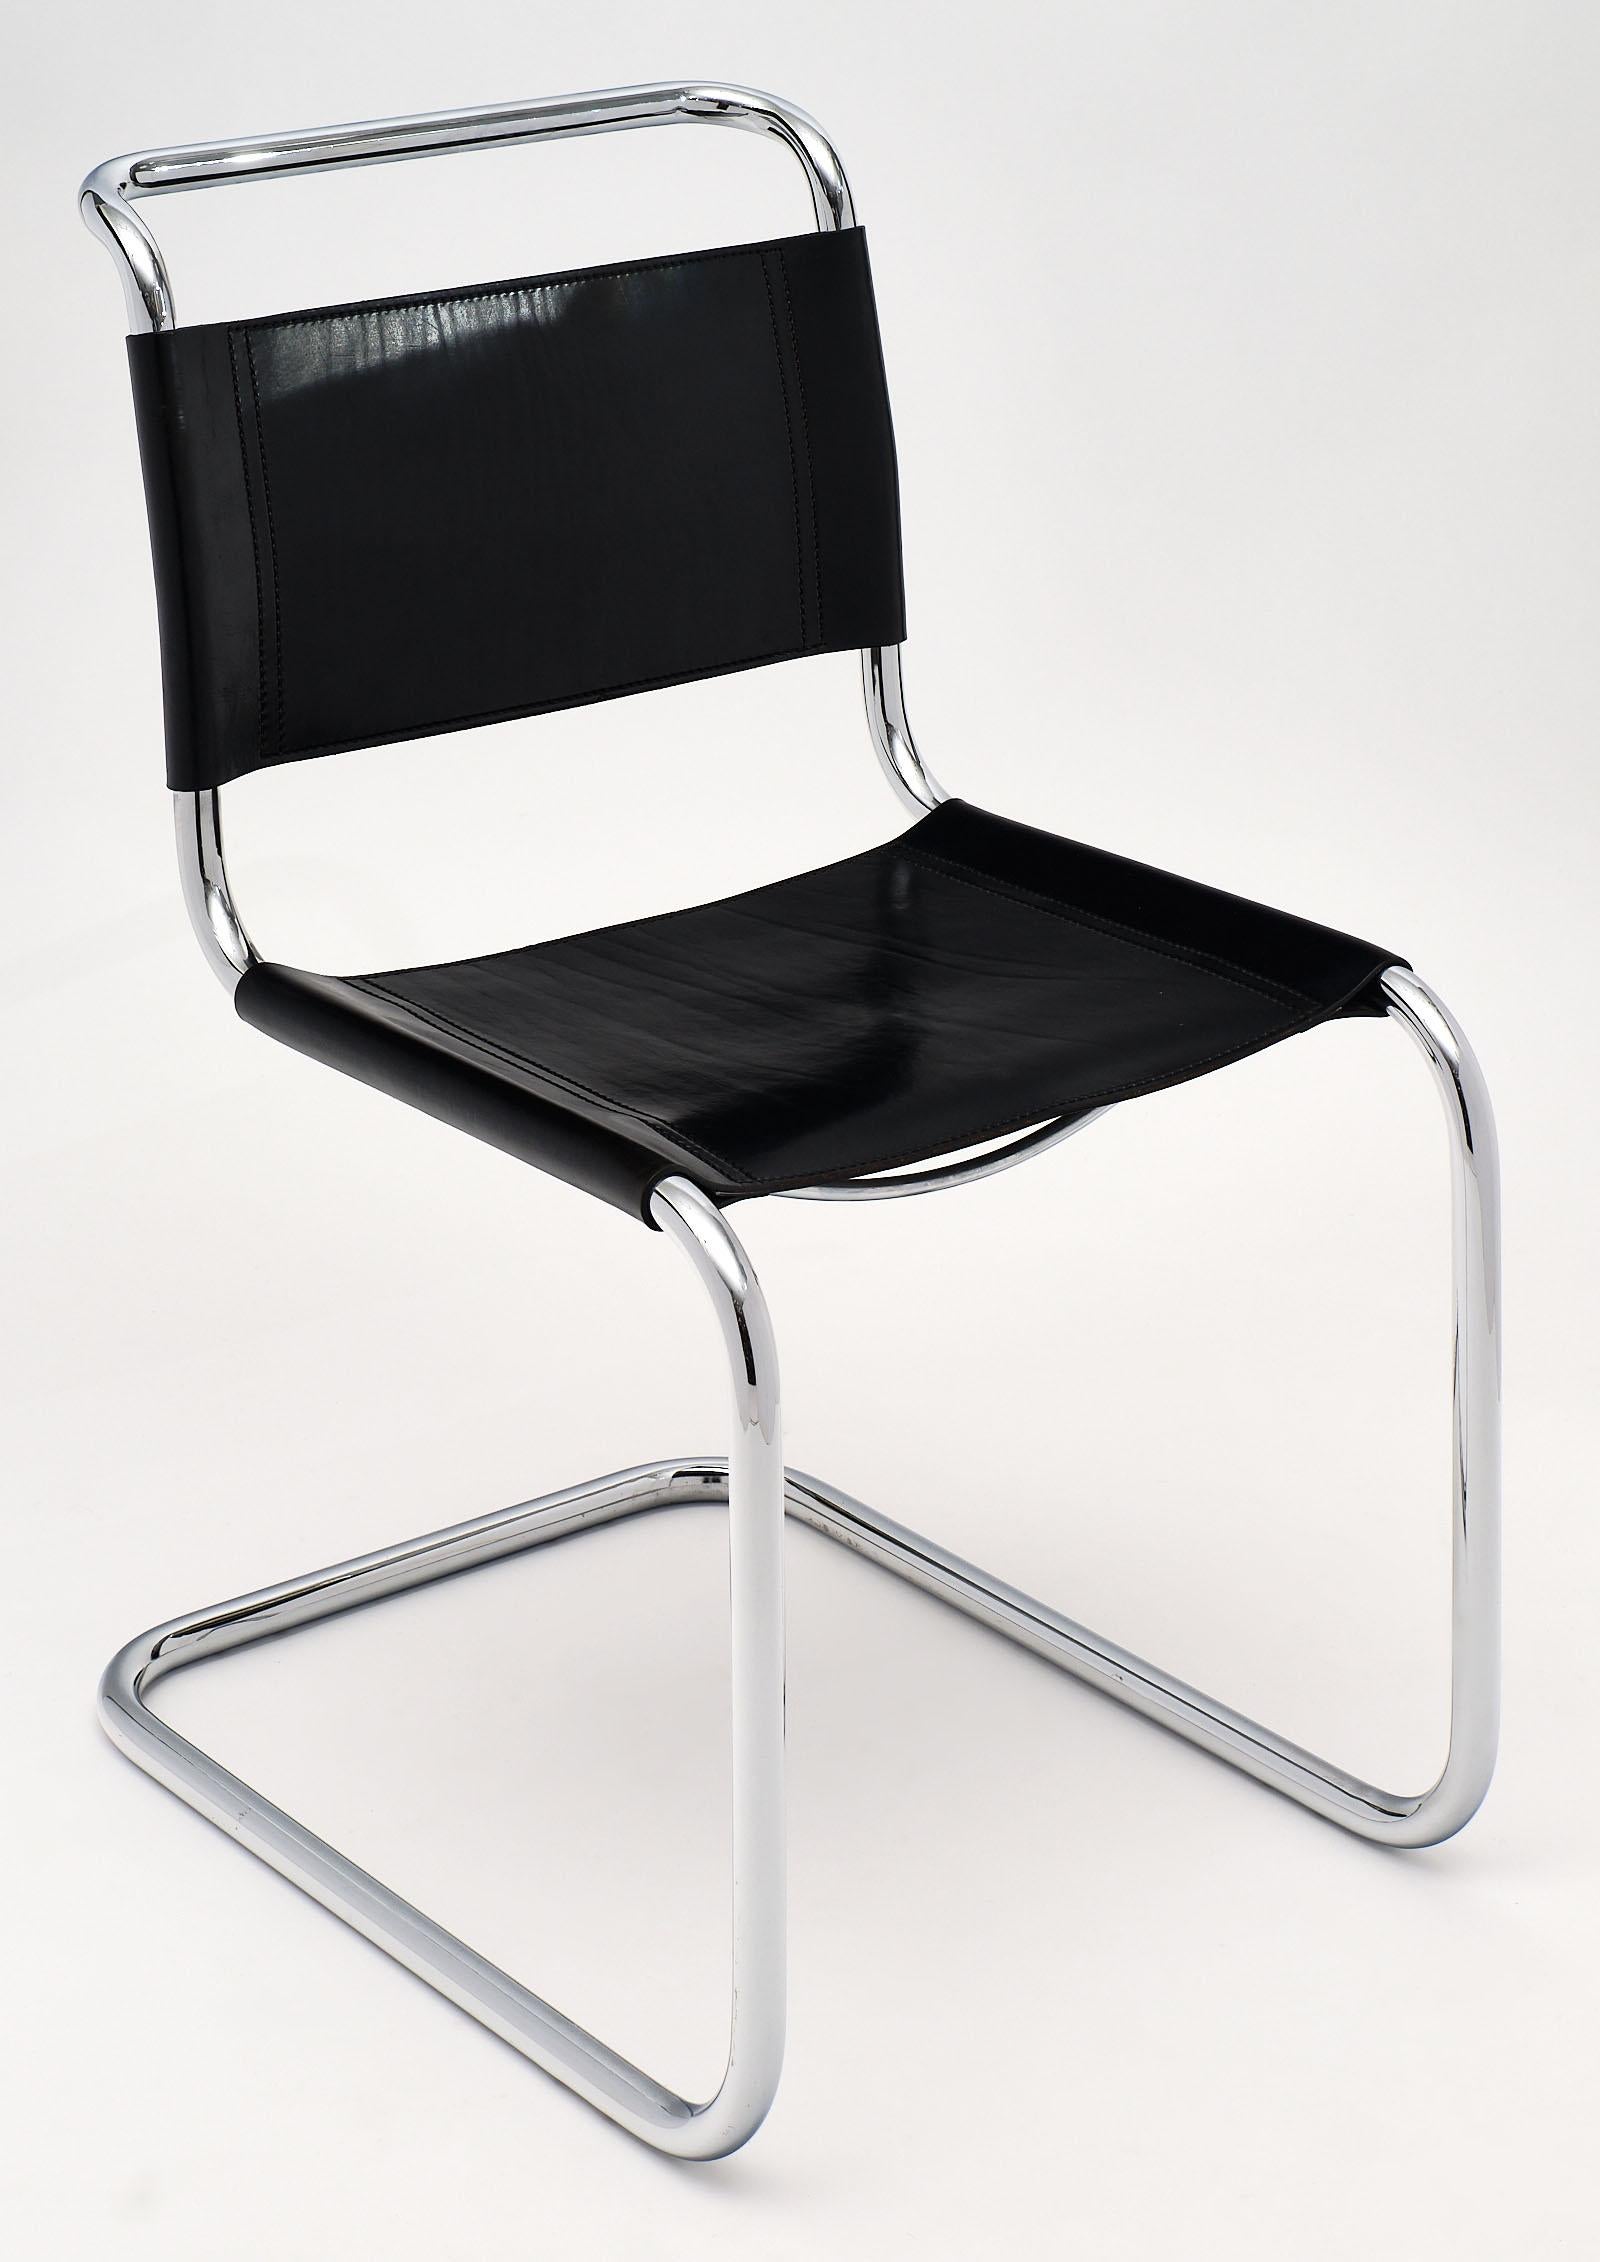 Excellent set of chairs featuring polished chrome frames and black leather seats and backs in excellent vintage condition. These iconic chairs are in fantastic condition and are very comfortable. We love the midcentury style and high quality of the